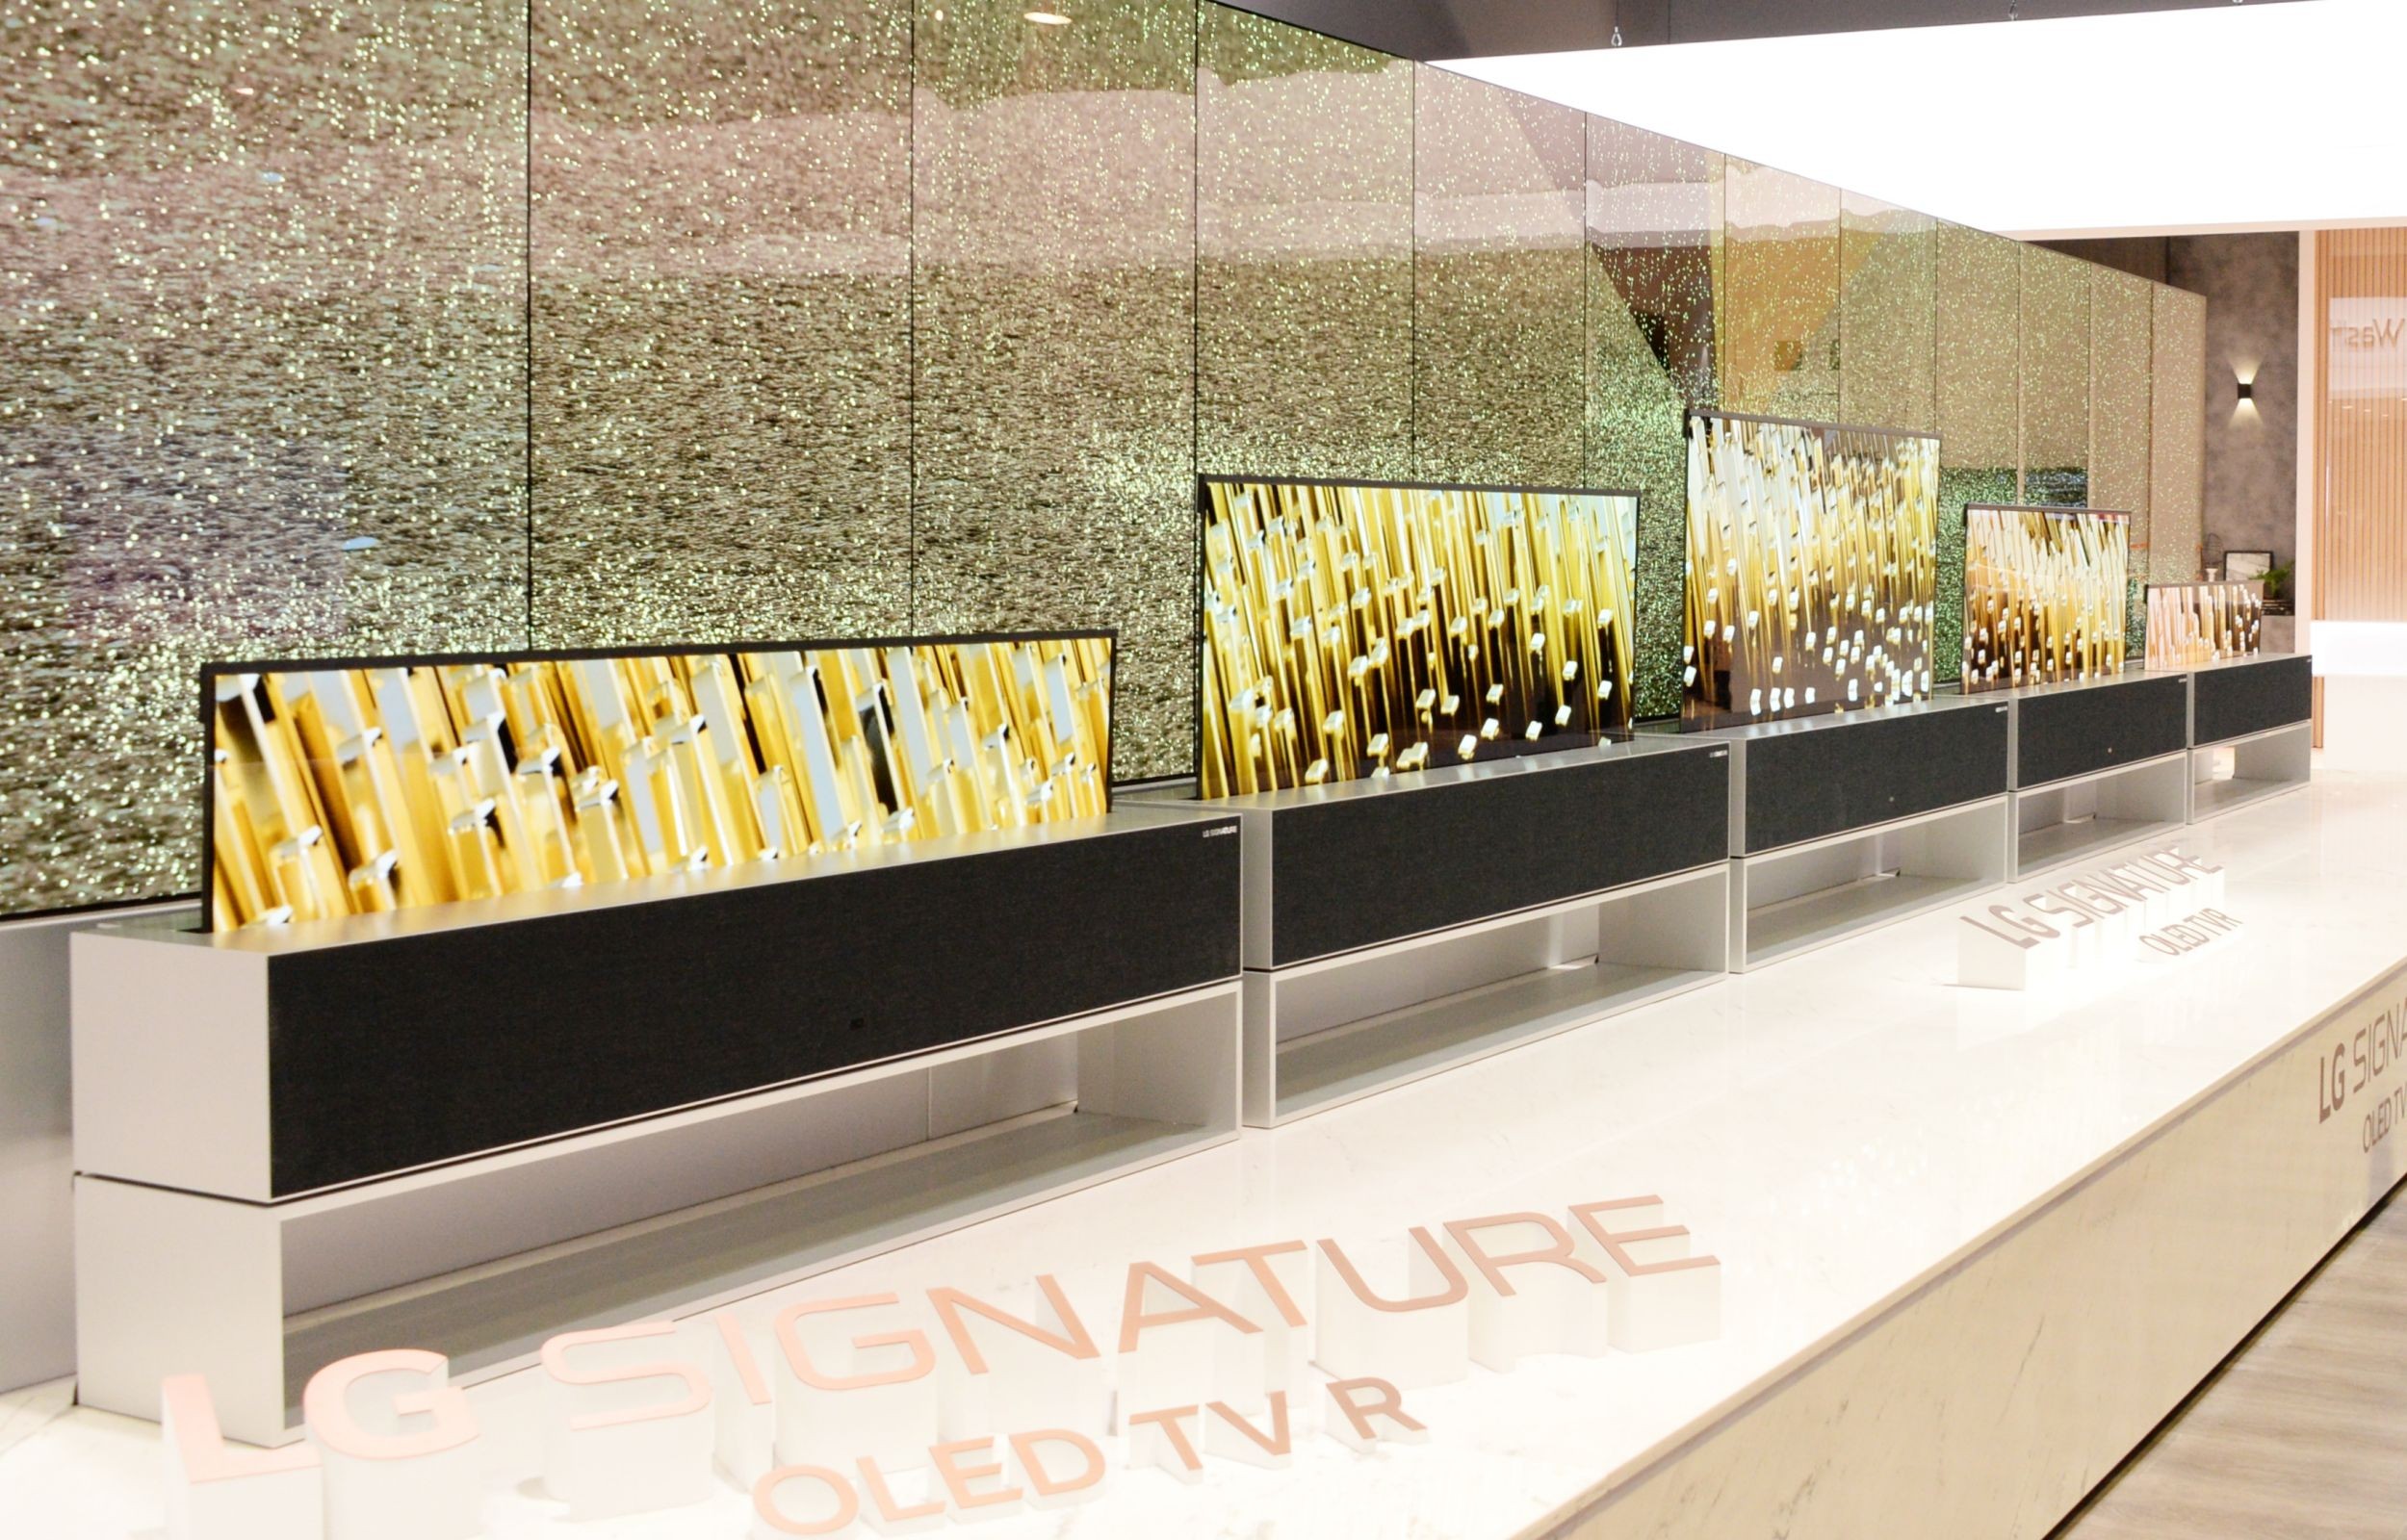 LG OLED TV R displayed in a row and in multiple viewing modes at LG’s CES 2019 booth